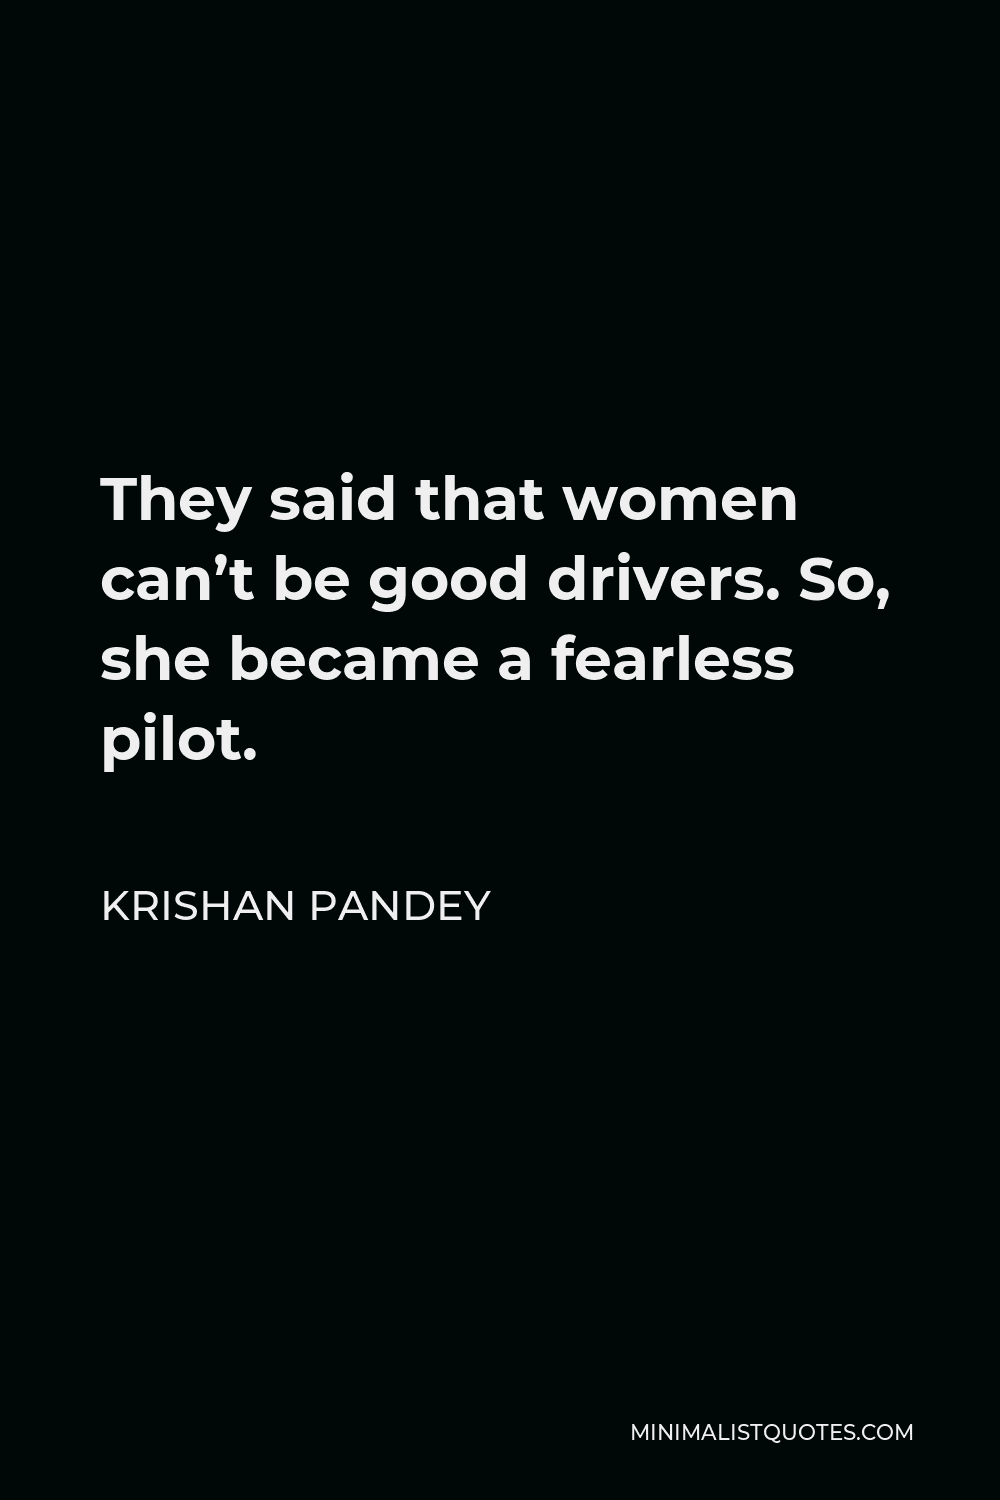 Krishan Pandey Quote - They said that women can’t be good drivers. So, she became a fearless pilot.